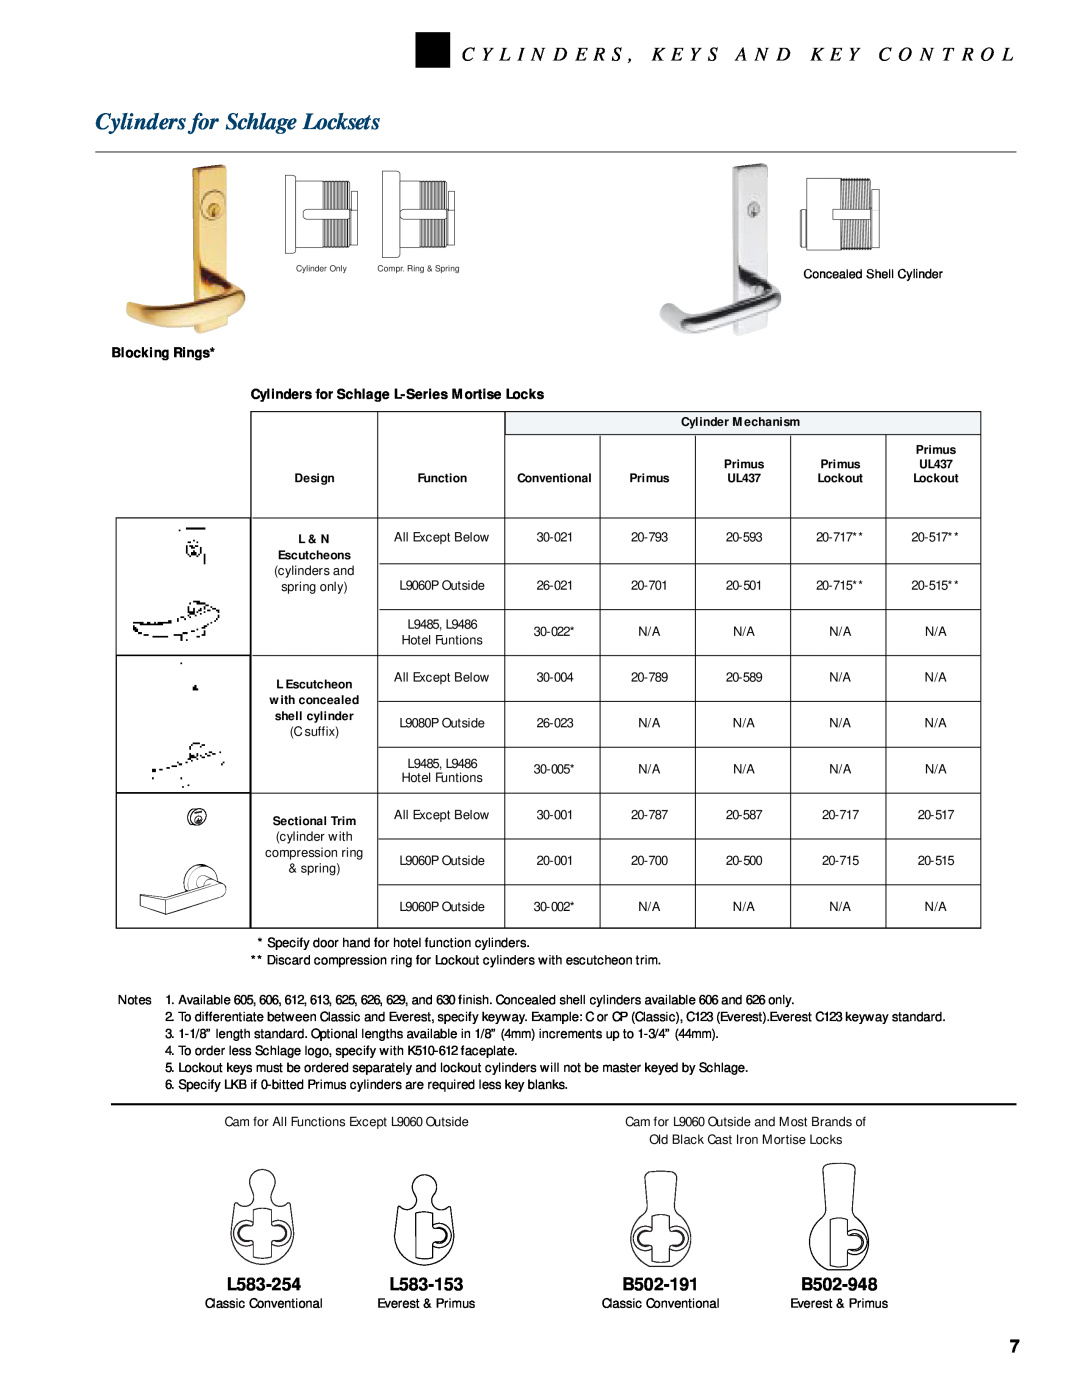 Schlage KEYS AND KEY CONTROL manual Cylinders for Schlage Locksets, L583-254, L583-153, B502-191, B502-948, Blocking Rings 